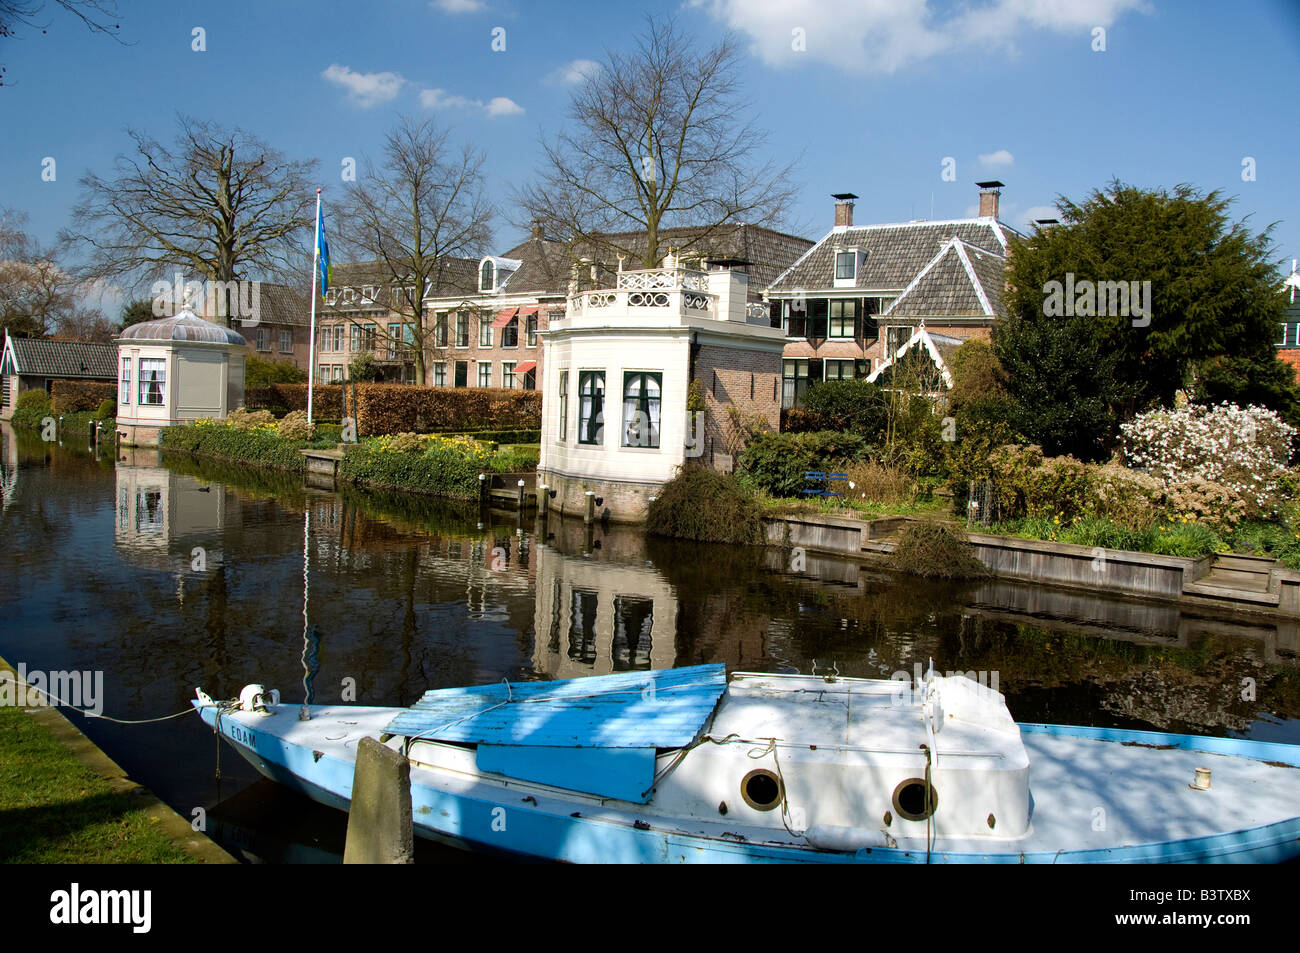 Europe, The Netherlands (aka Holland). Medieval cheese producing town of Edam. Typical homes along the canals in Edam. Stock Photo